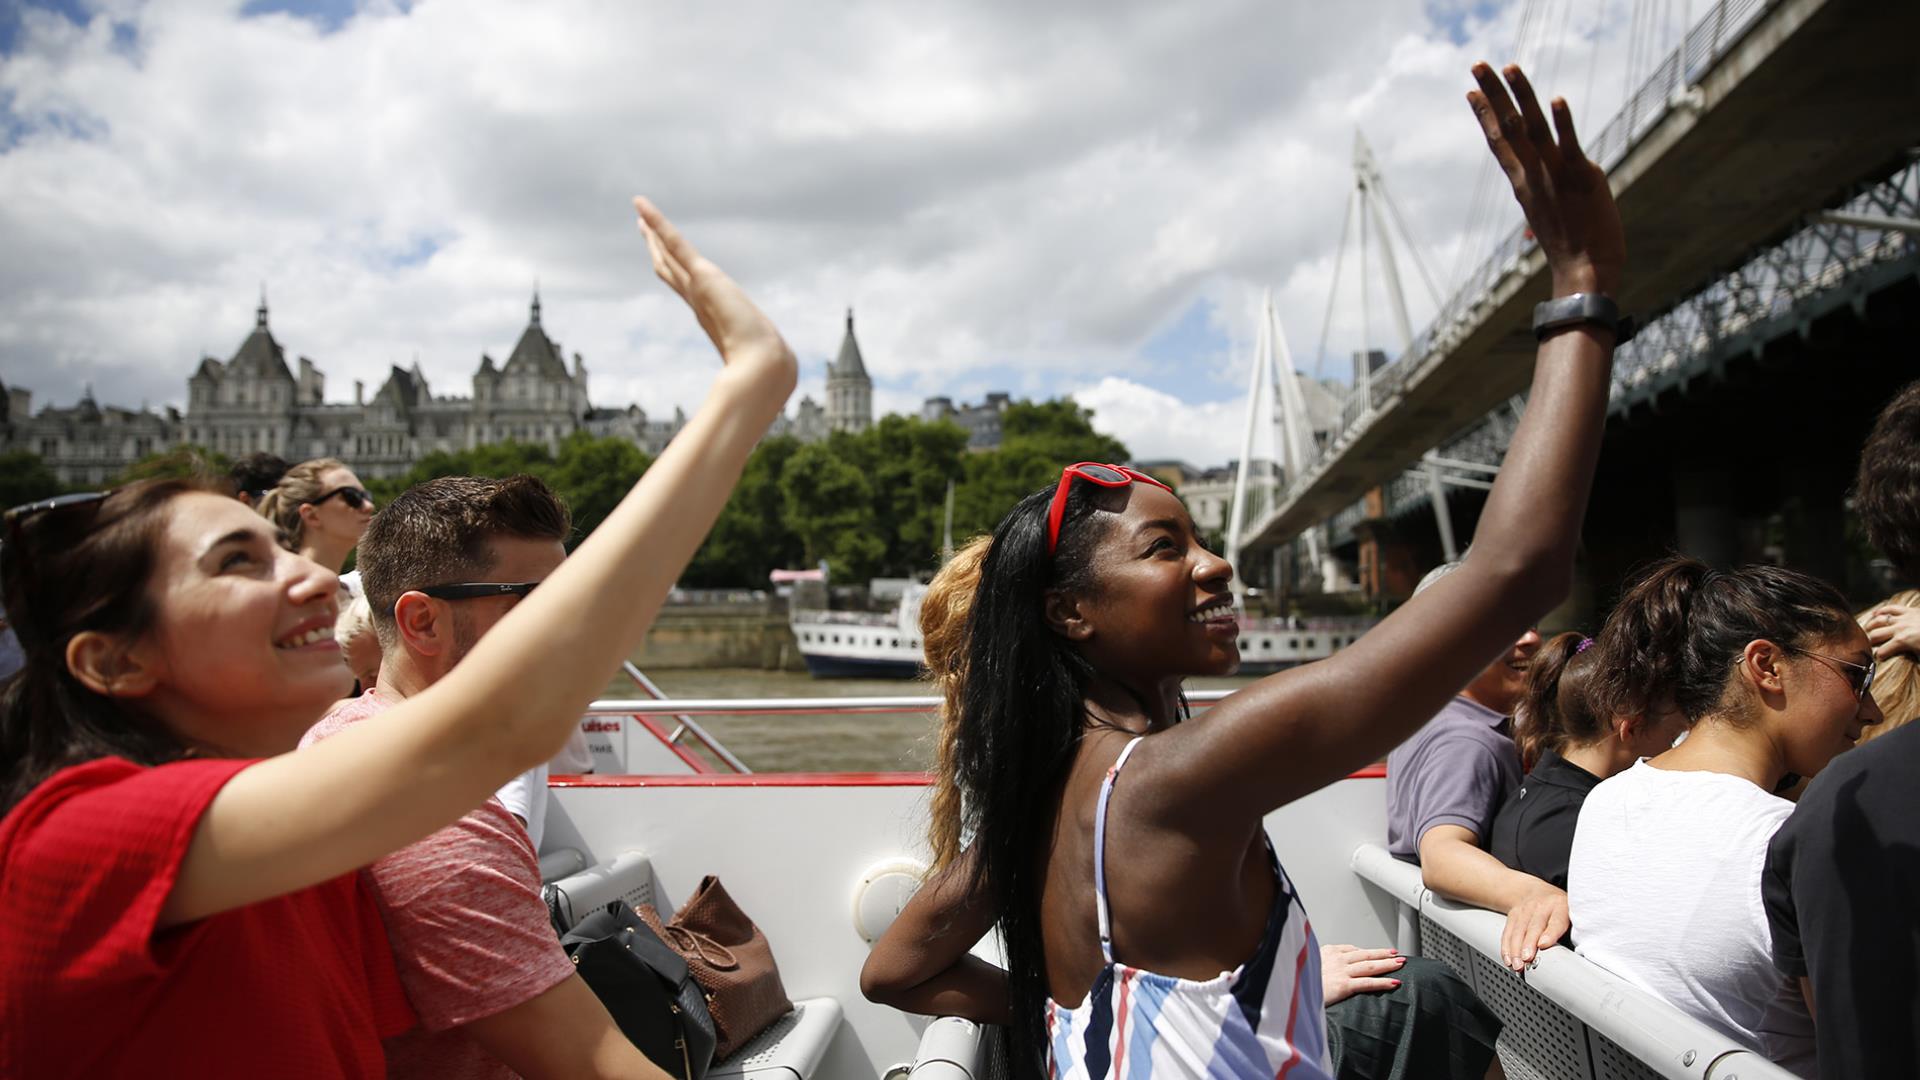 A group of girls wave at passers-by from the top deck of a City Cruises boat.